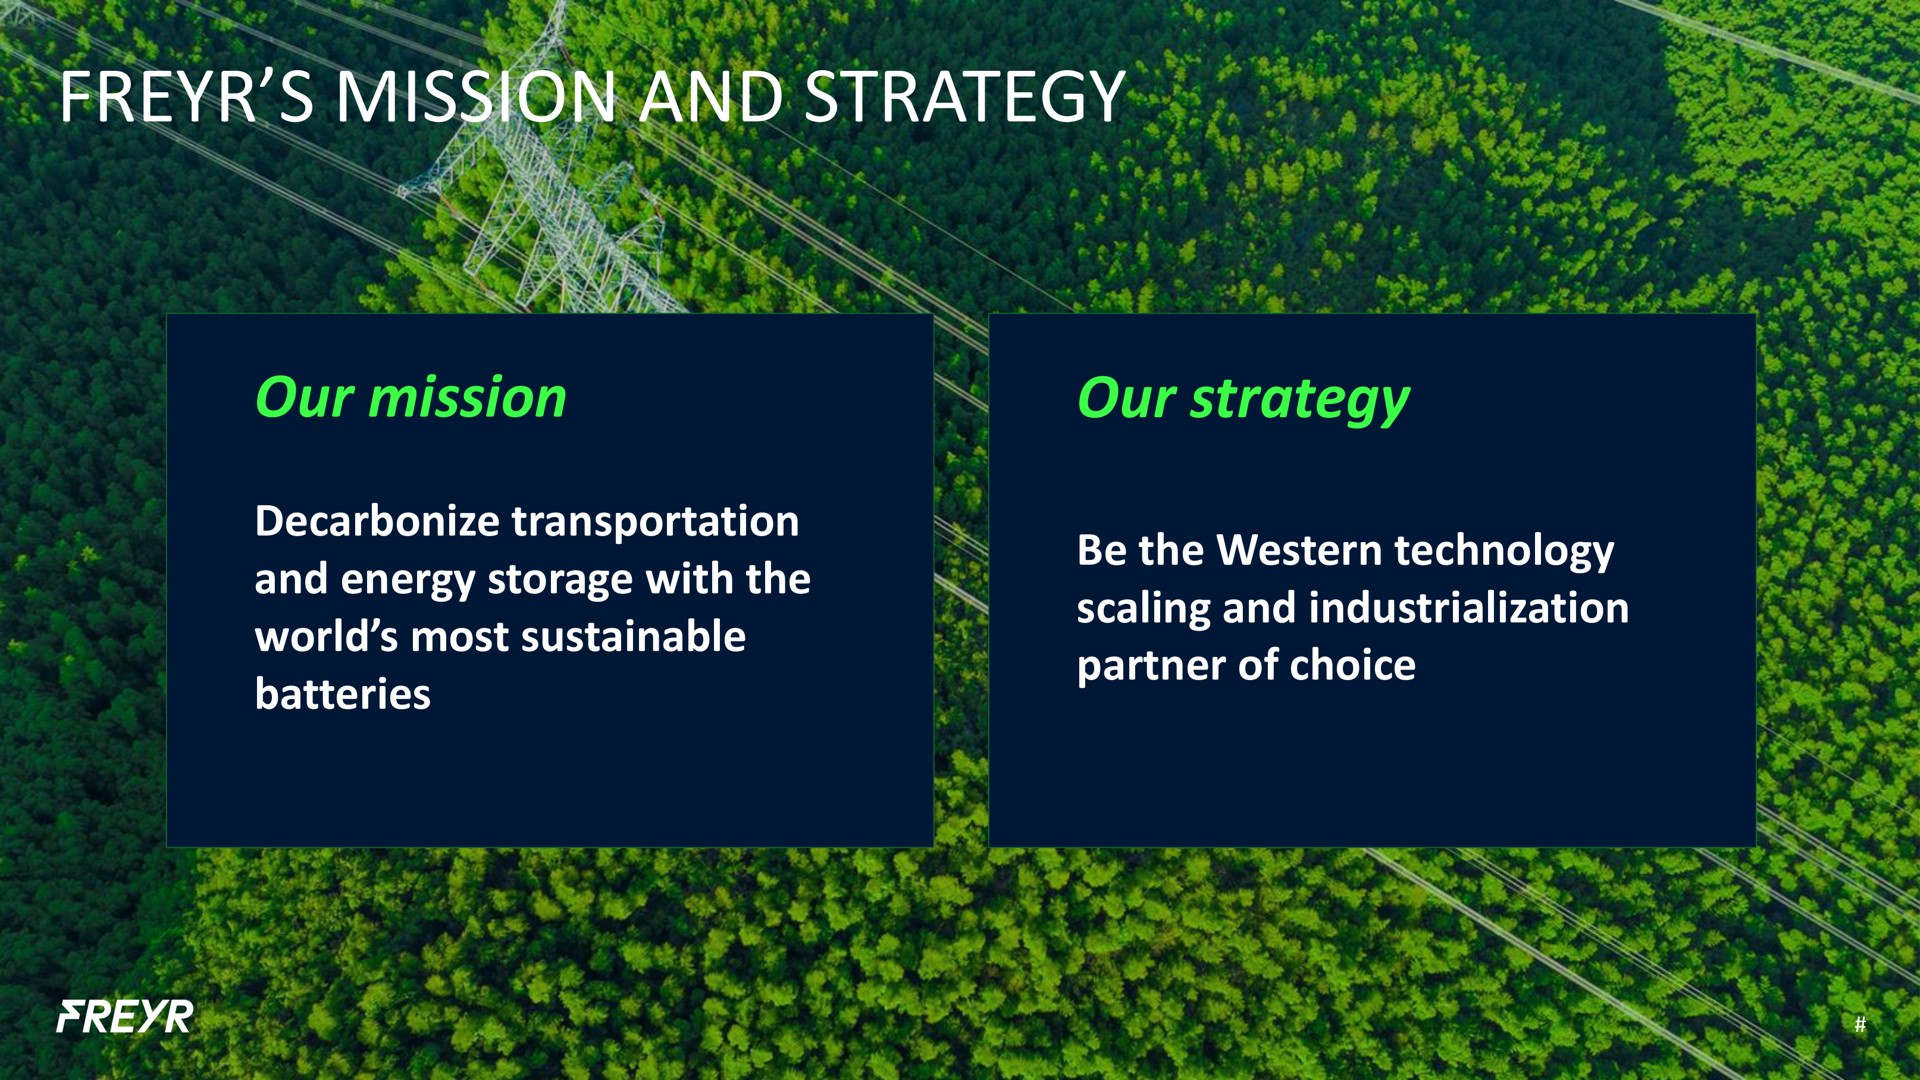 mission and strategy our mission our strategy decarbonize transportation and energy storage with the world most sustainable batteries be the western technology scaling and industrialization partner of choice teeth an wha a we | Freyr